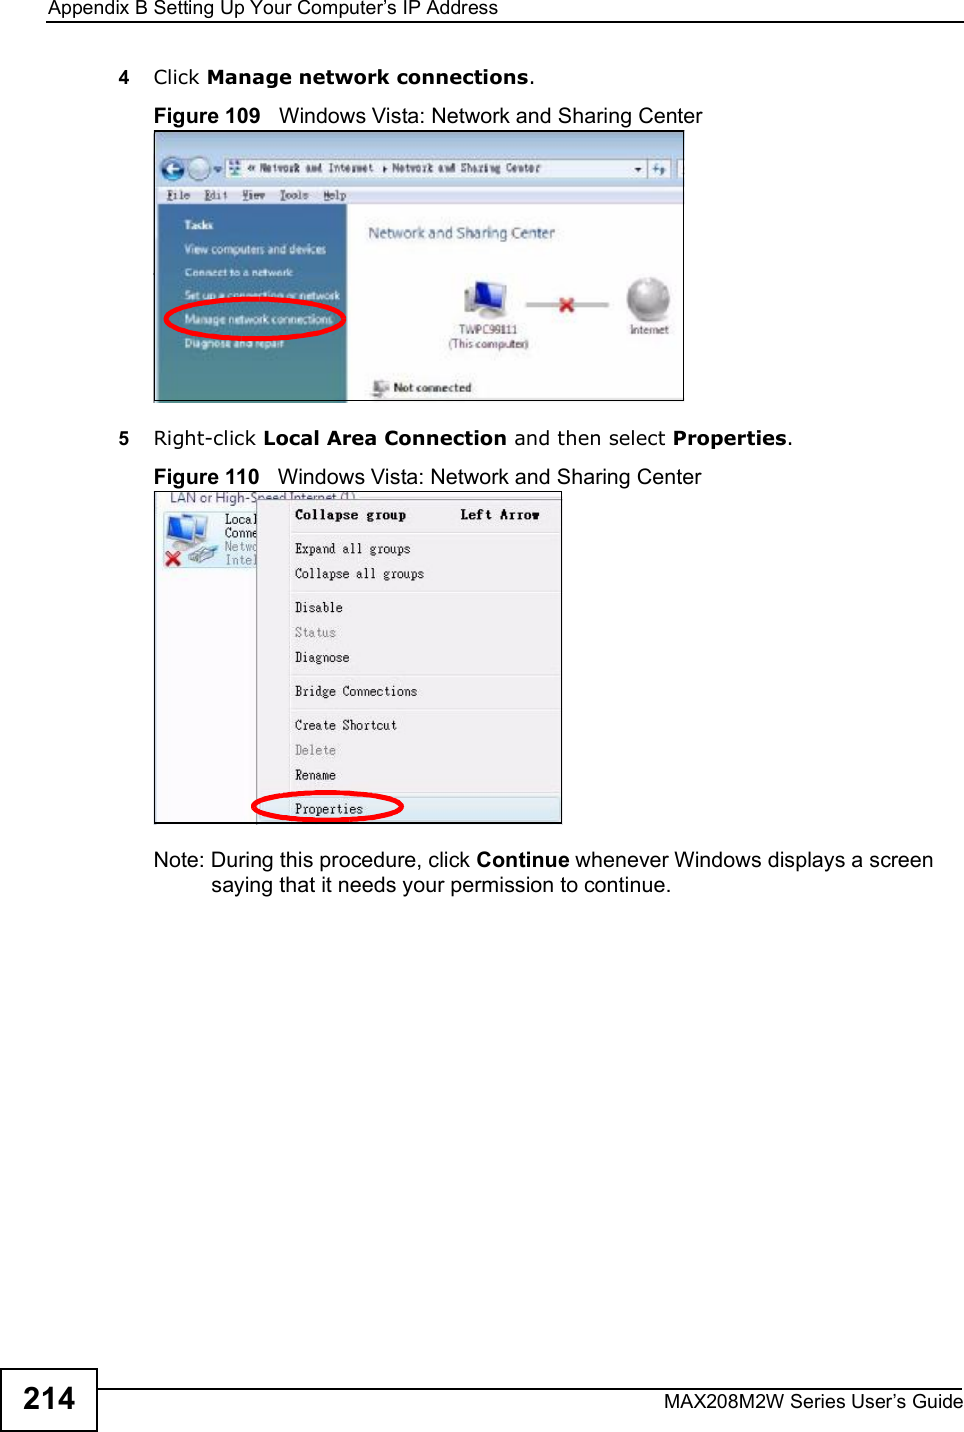 Appendix BSetting Up Your Computer s IP AddressMAX208M2W Series User s Guide2144Click Manage network connections.Figure 109   Windows Vista: Network and Sharing Center5Right-click Local Area Connection and then select Properties.Figure 110   Windows Vista: Network and Sharing CenterNote: During this procedure, click Continue whenever Windows displays a screen saying that it needs your permission to continue.